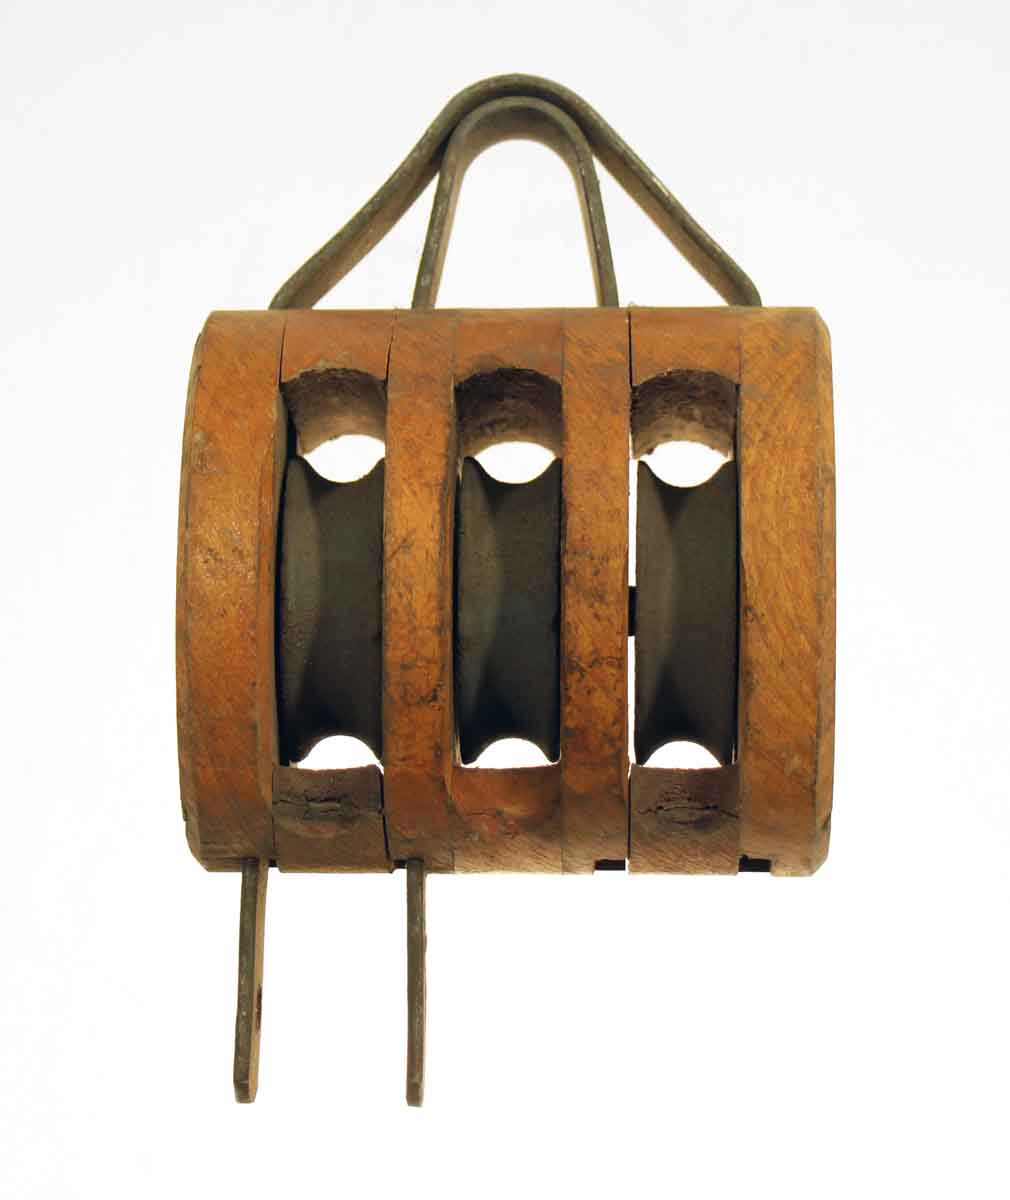 Wooden Pulley with Metal Wheels